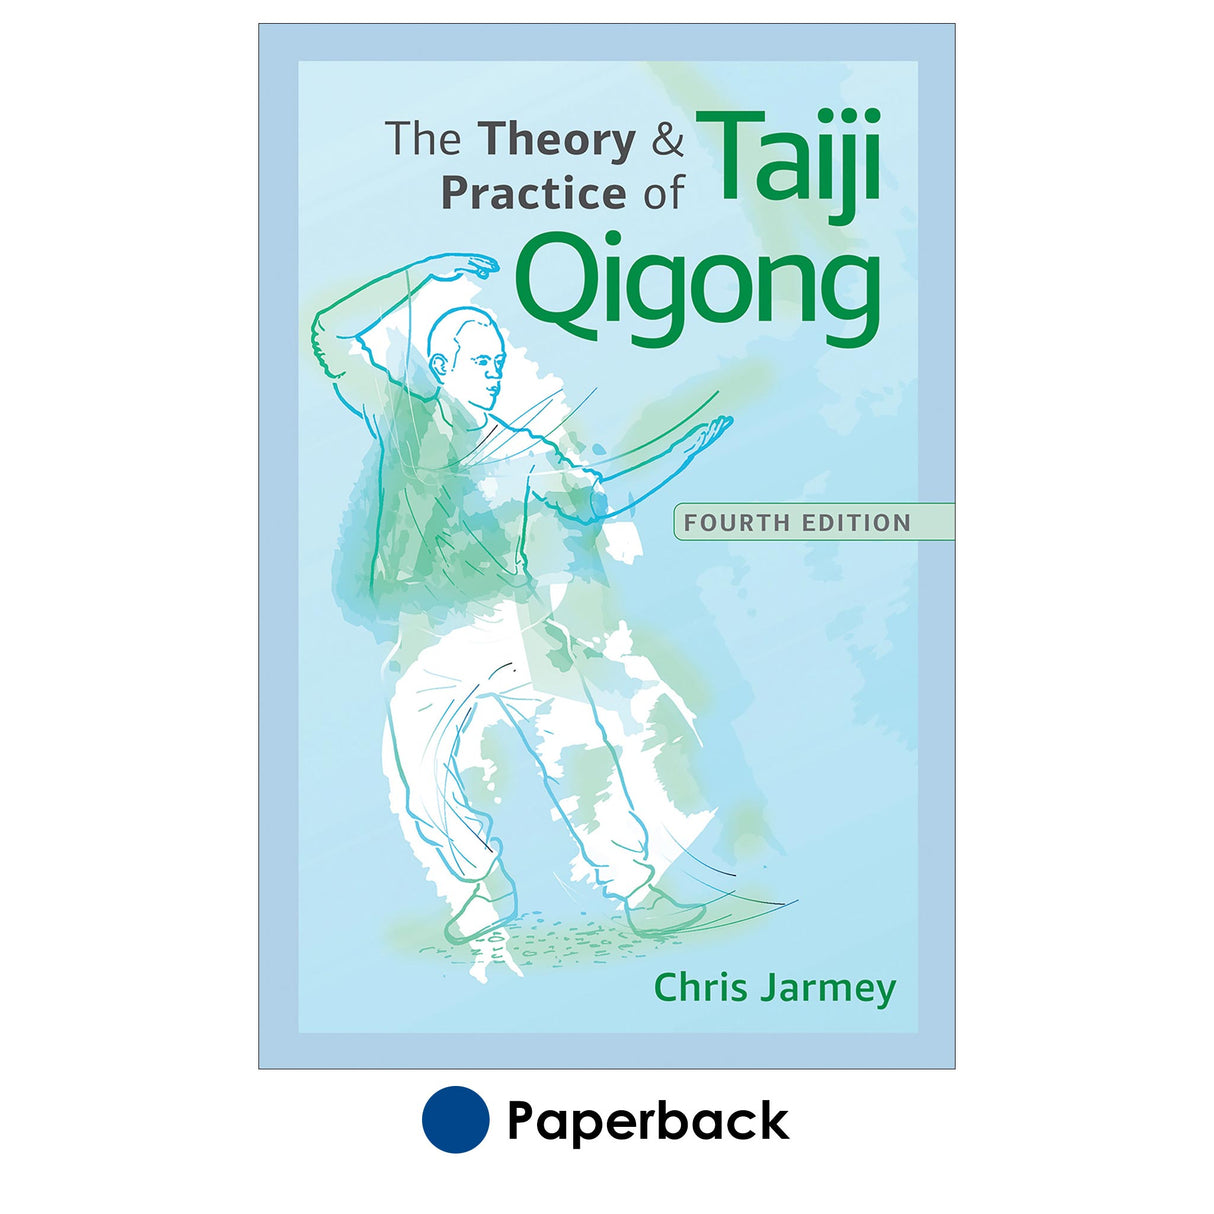 Theory and Practice of Taiji Qigong-4th Edition, The